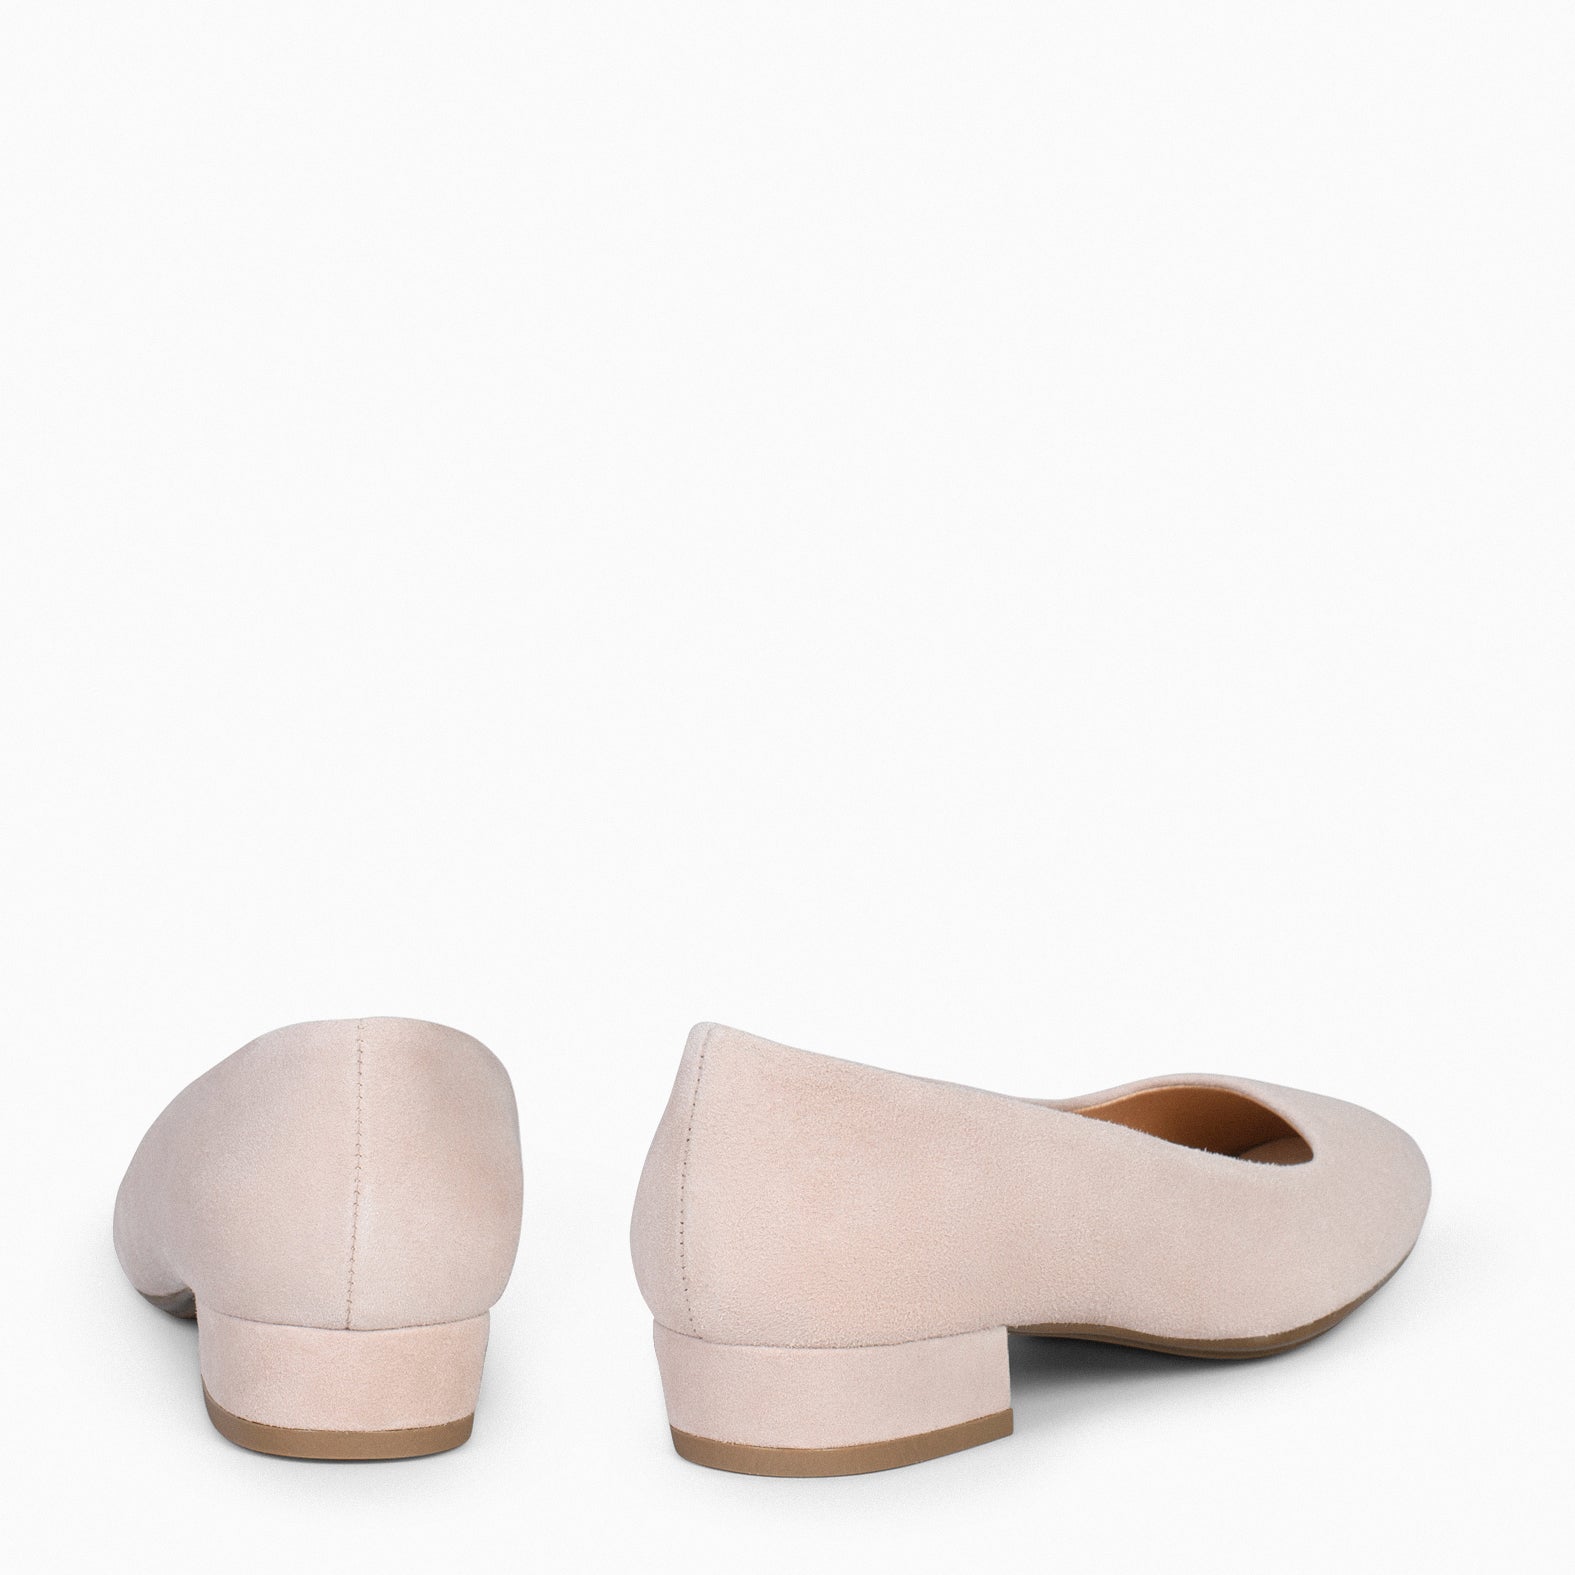 URBAN XS –  NUDE low-heeled suede shoes